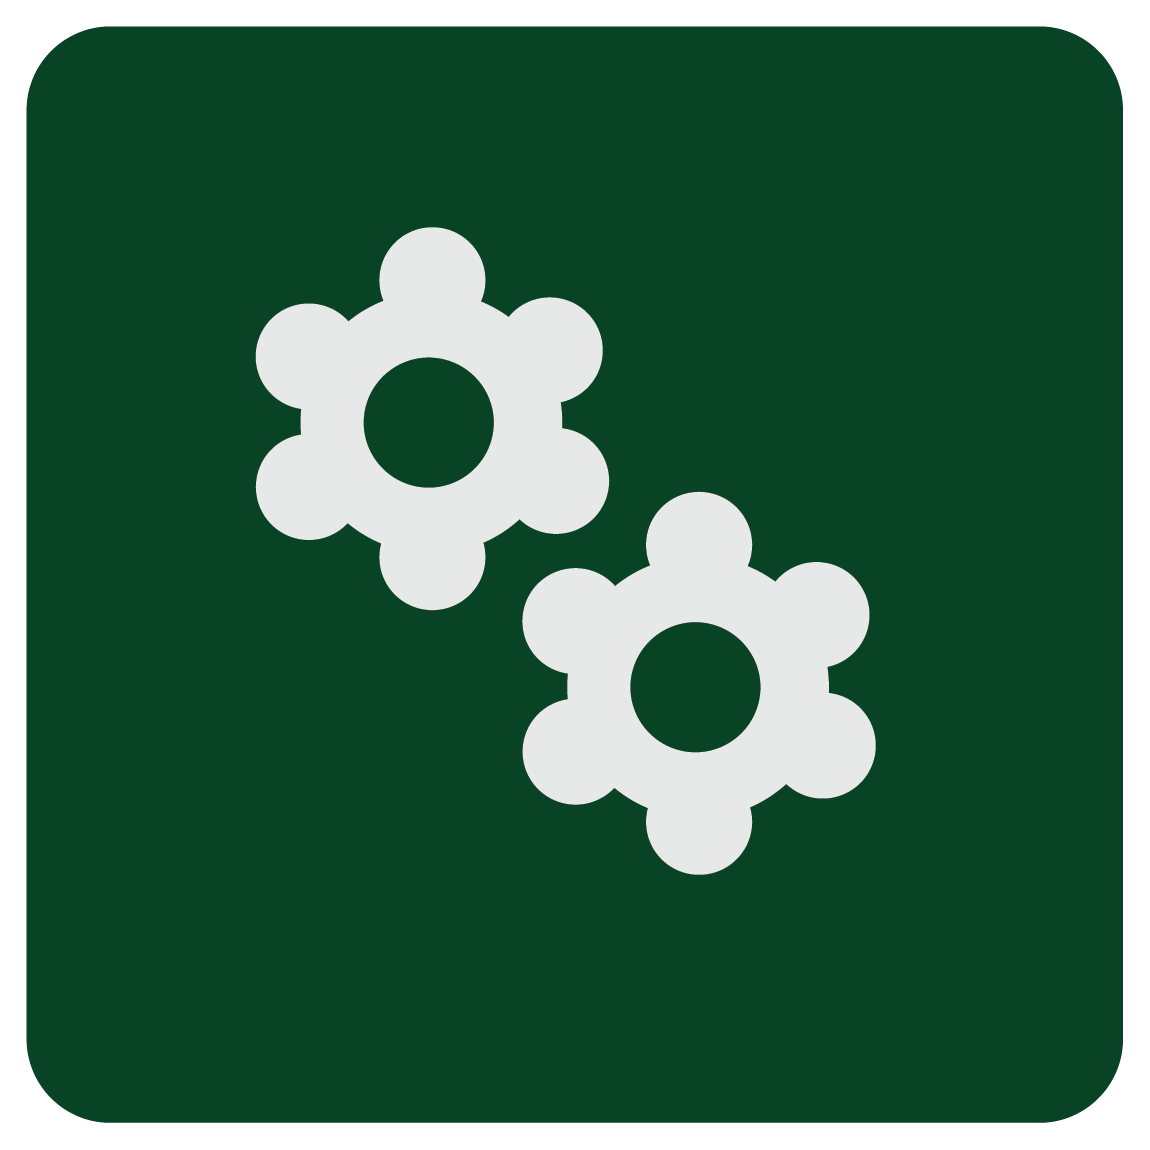 A green square with two white flowers on it.